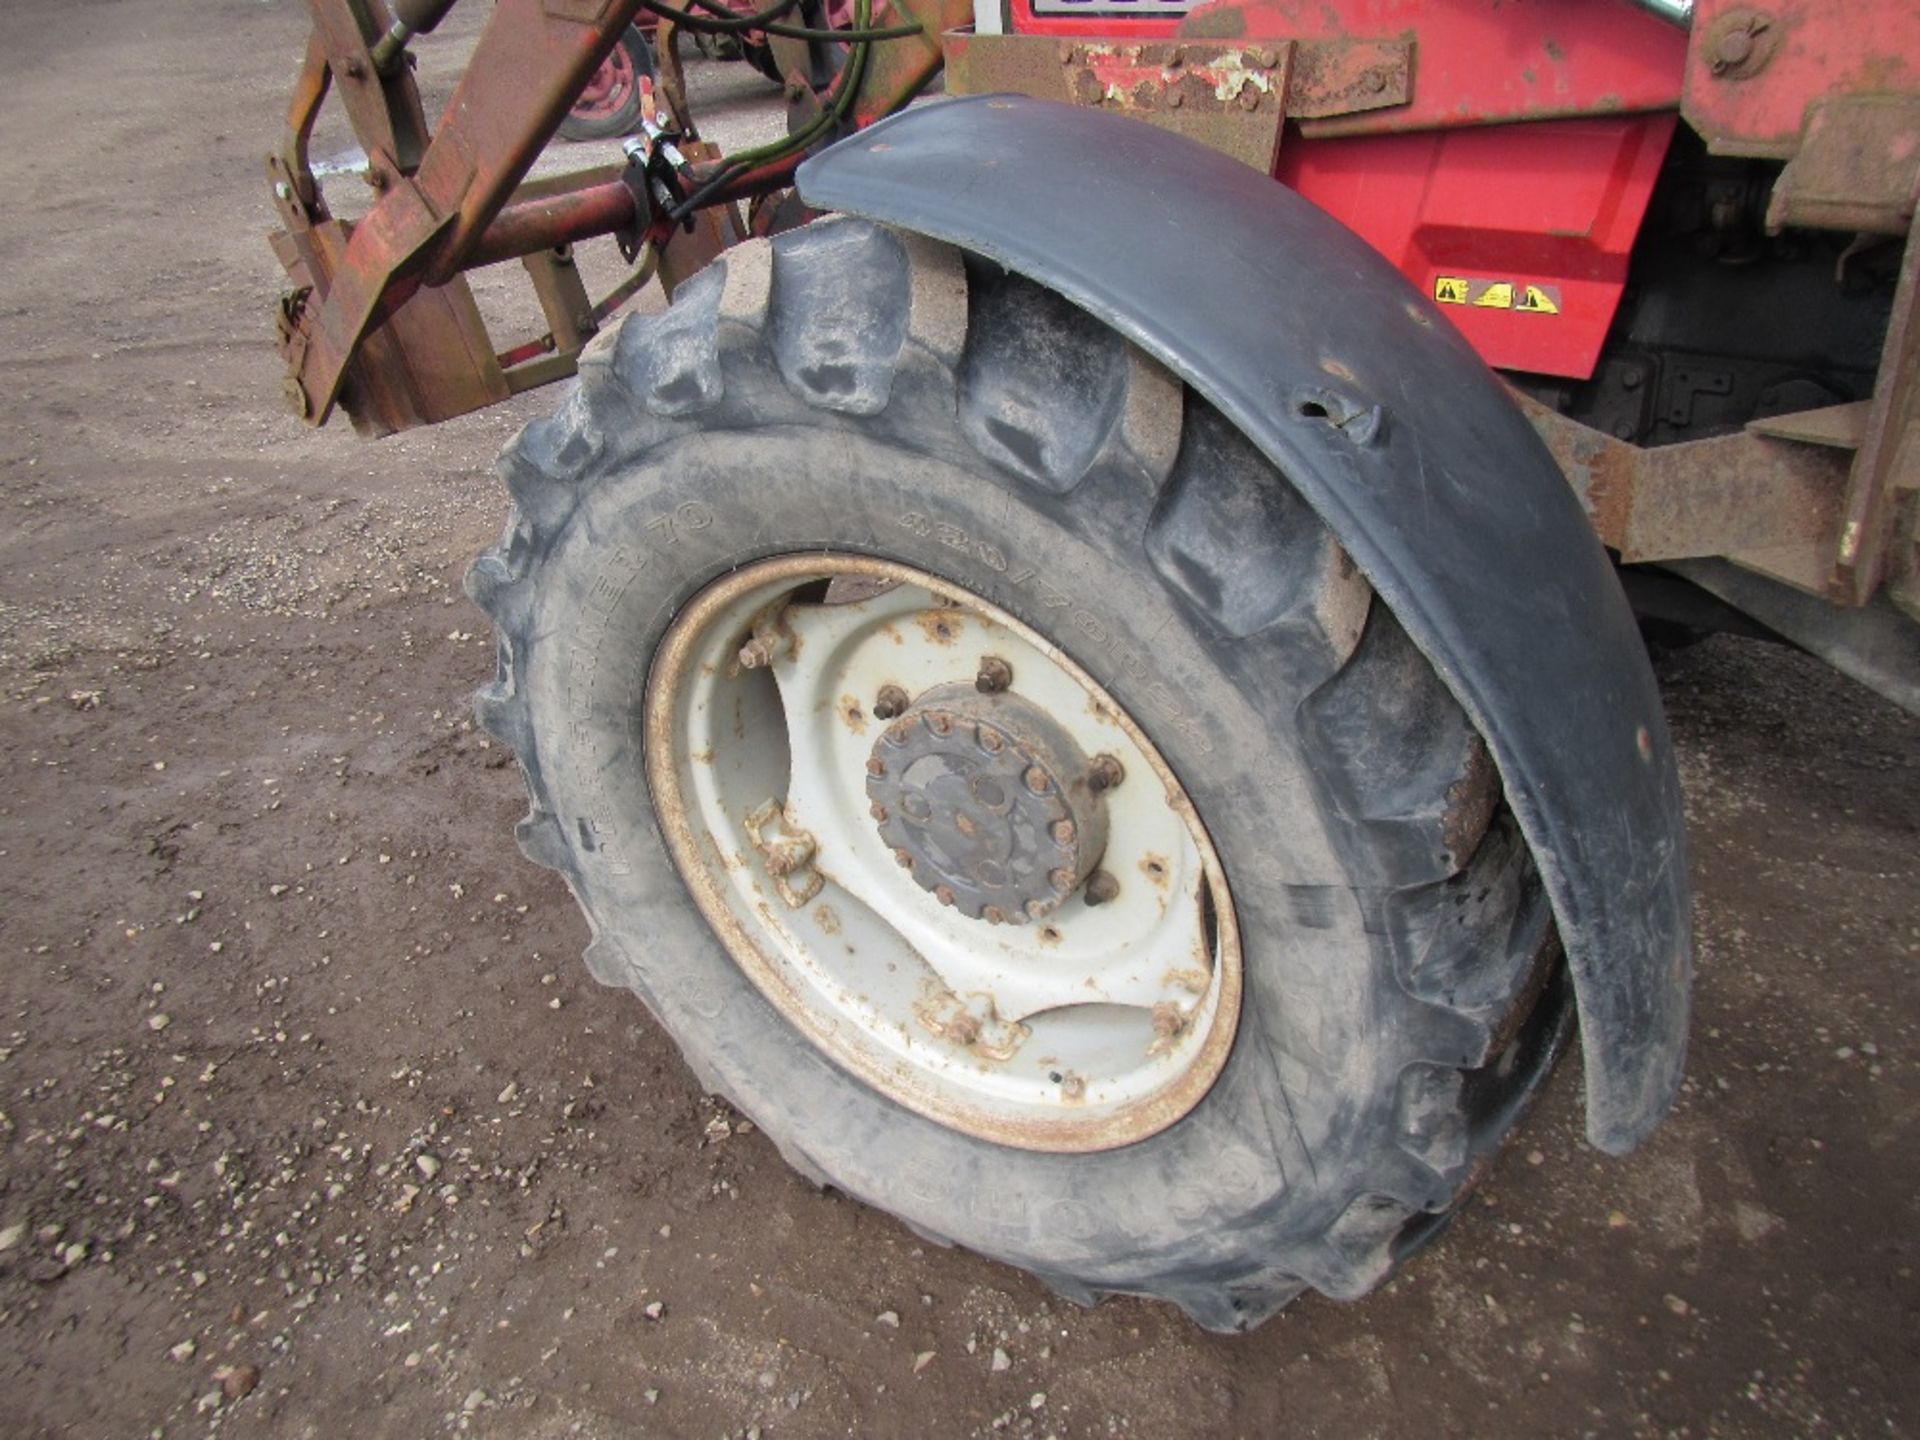 1994 Massey Ferguson 3090 4wd Tractor with Front Loader. Reg. No. M317 OCW Ser No C201010 - Image 12 of 18